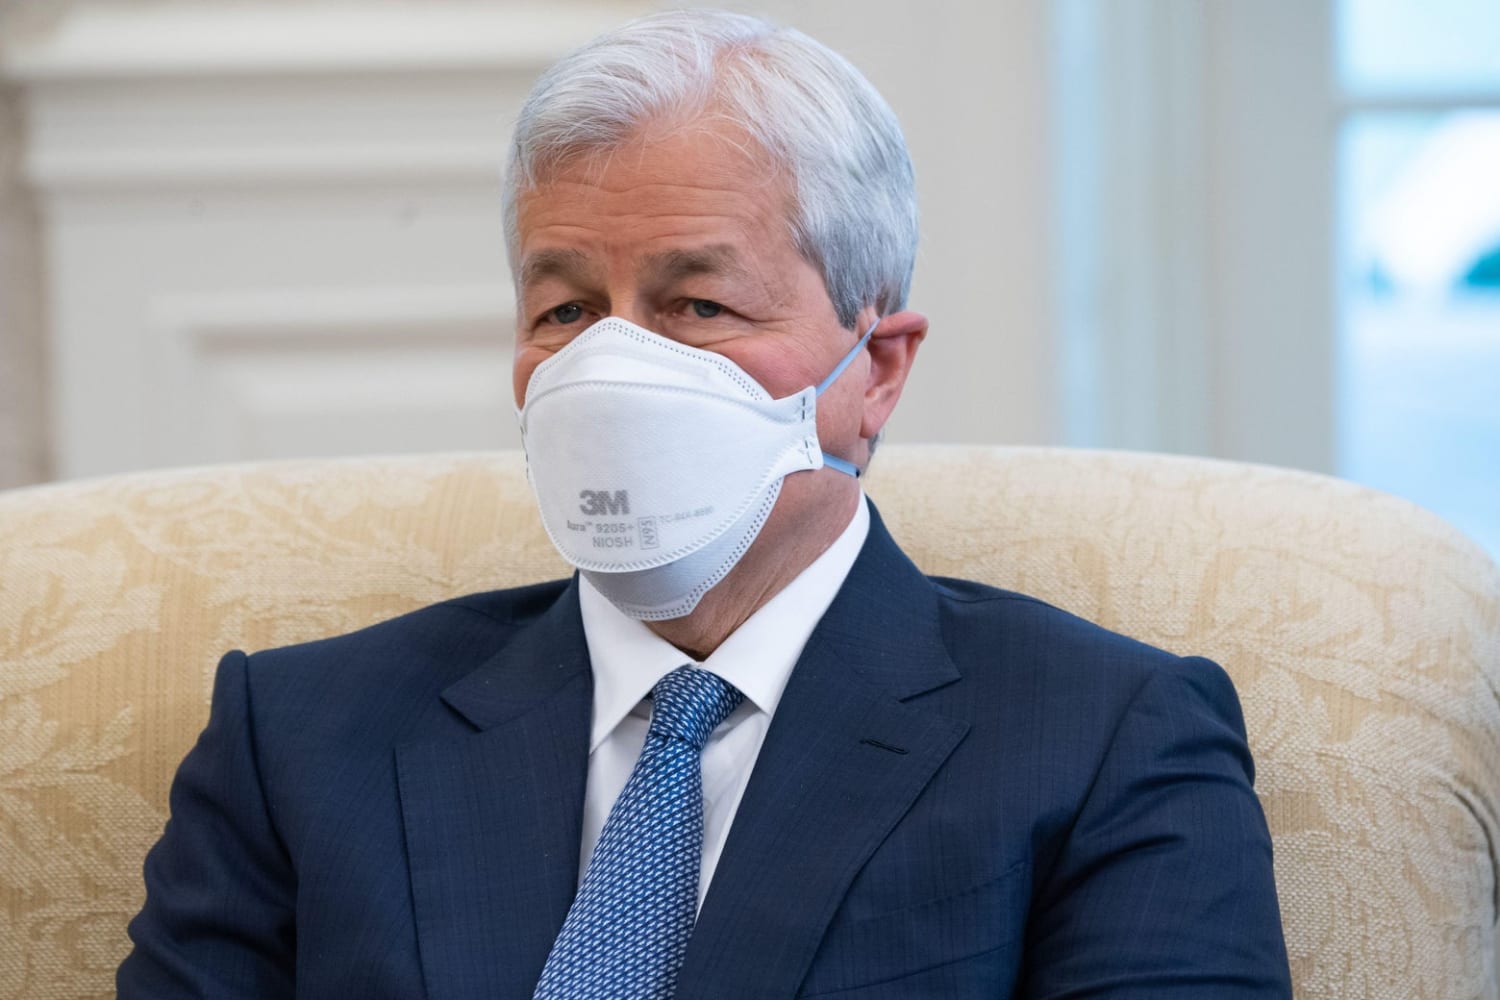 Jamie Dimon Will Let Some Bankers Work From Home, but He Won’t Like It